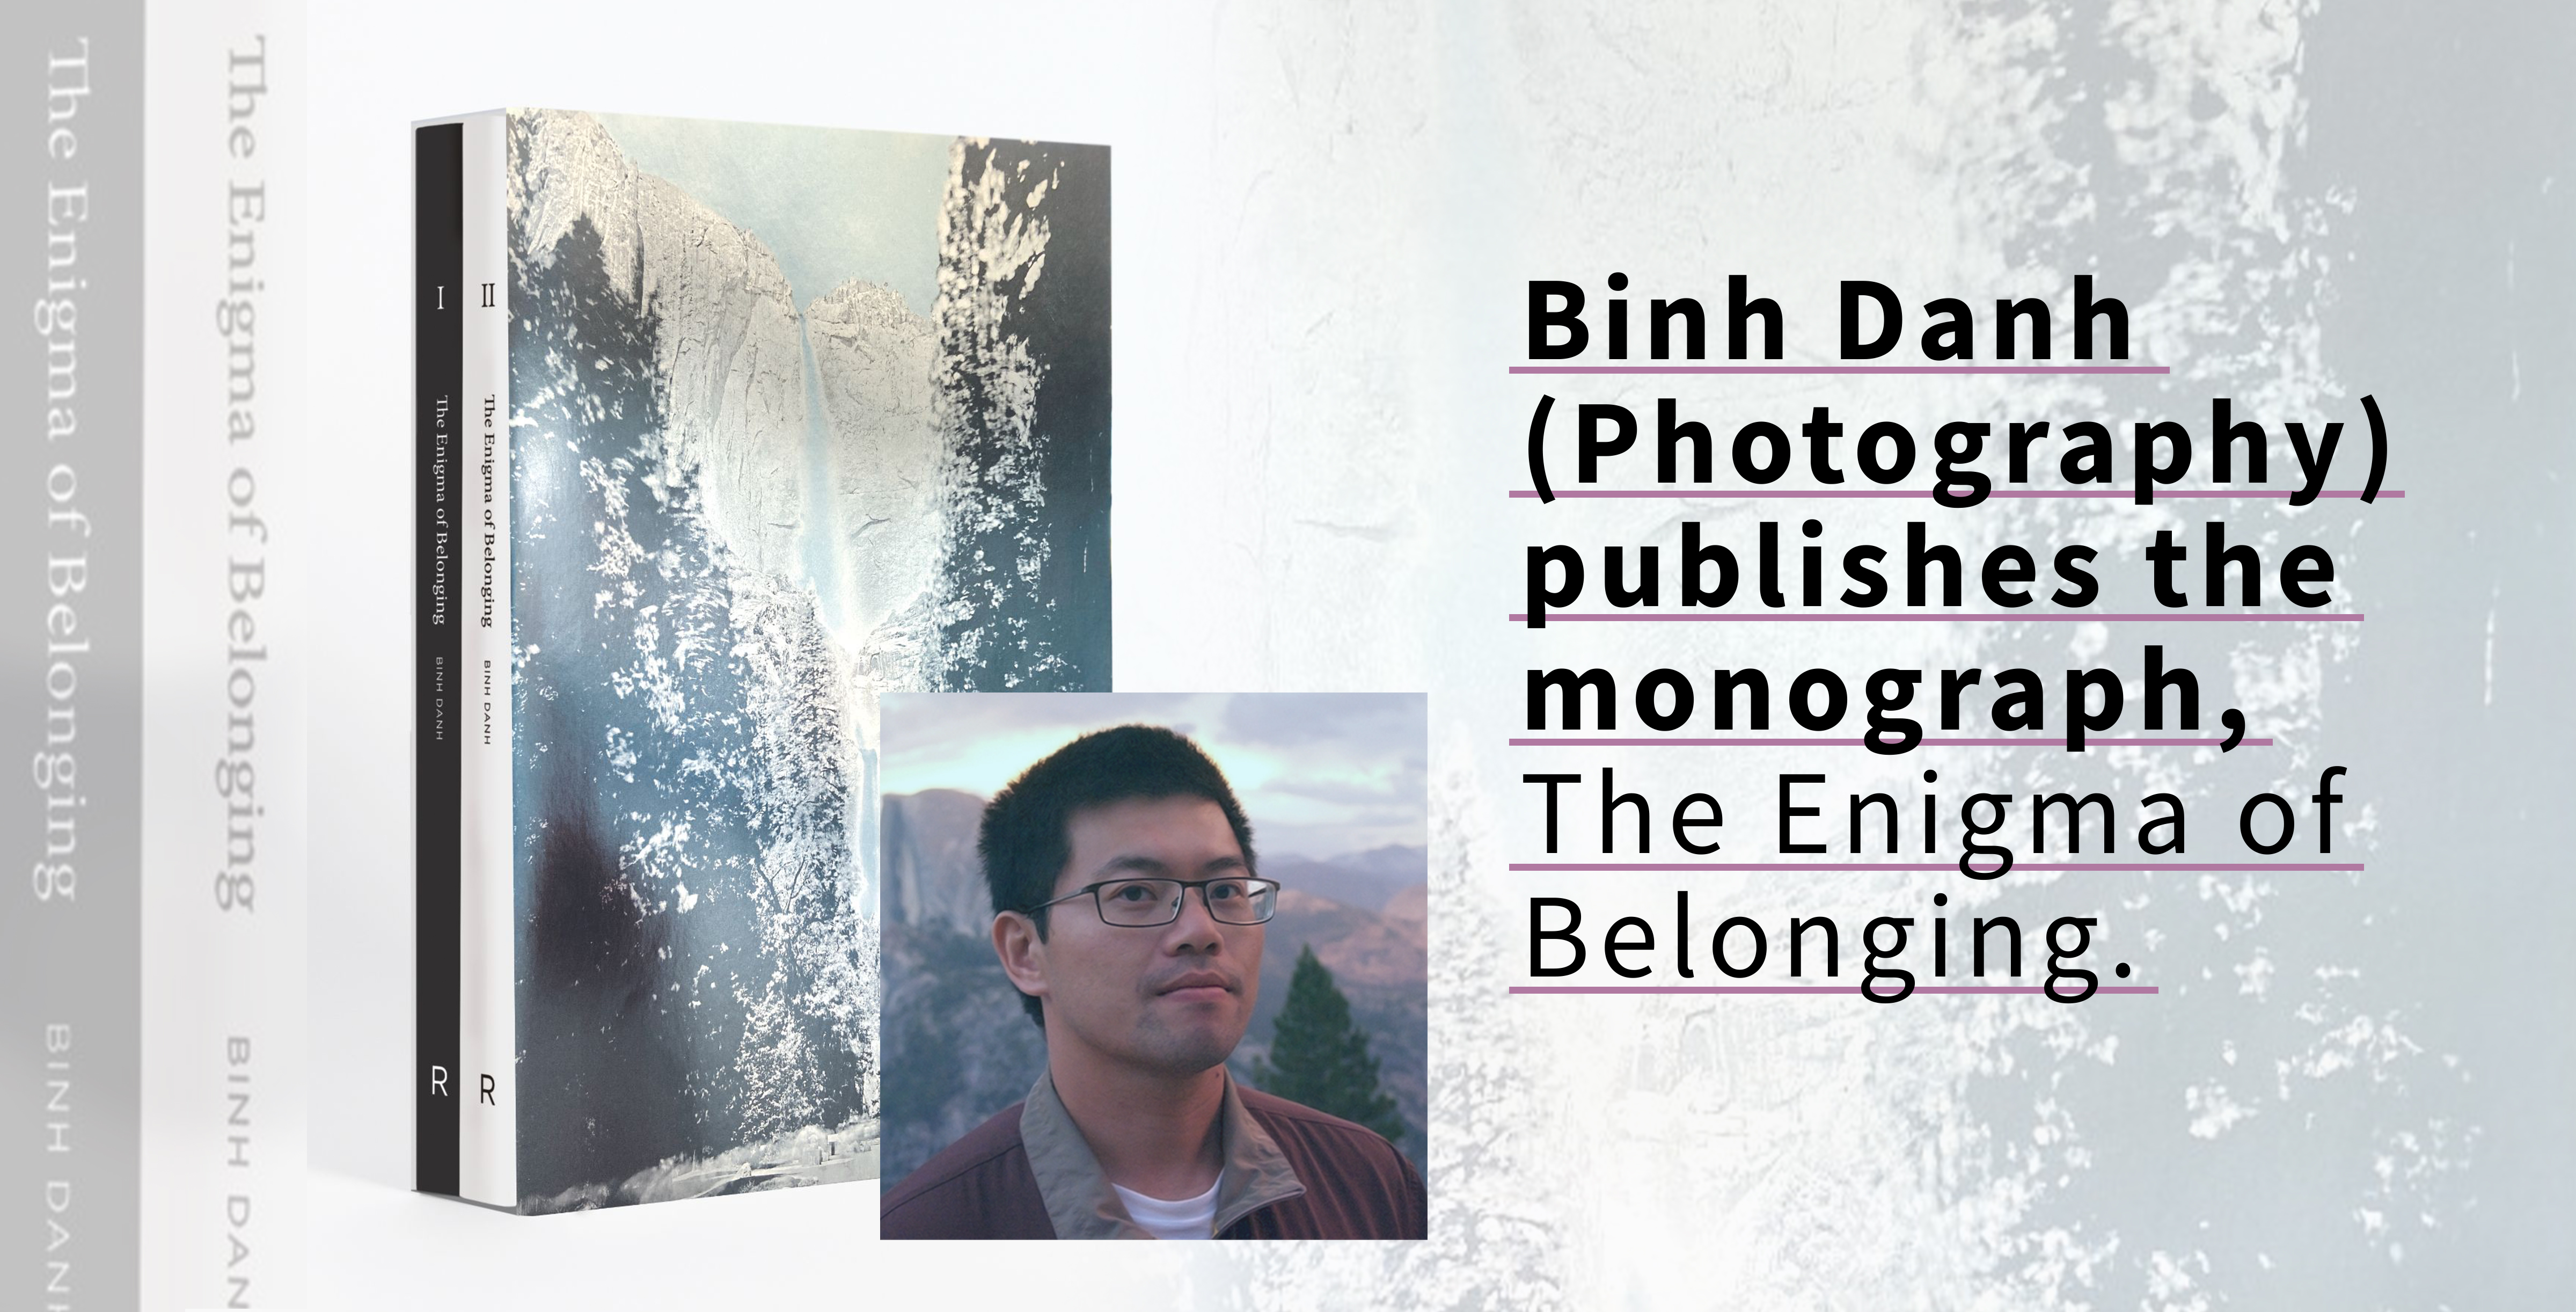 Professor Binh Danh (Photography) publishes the monograph